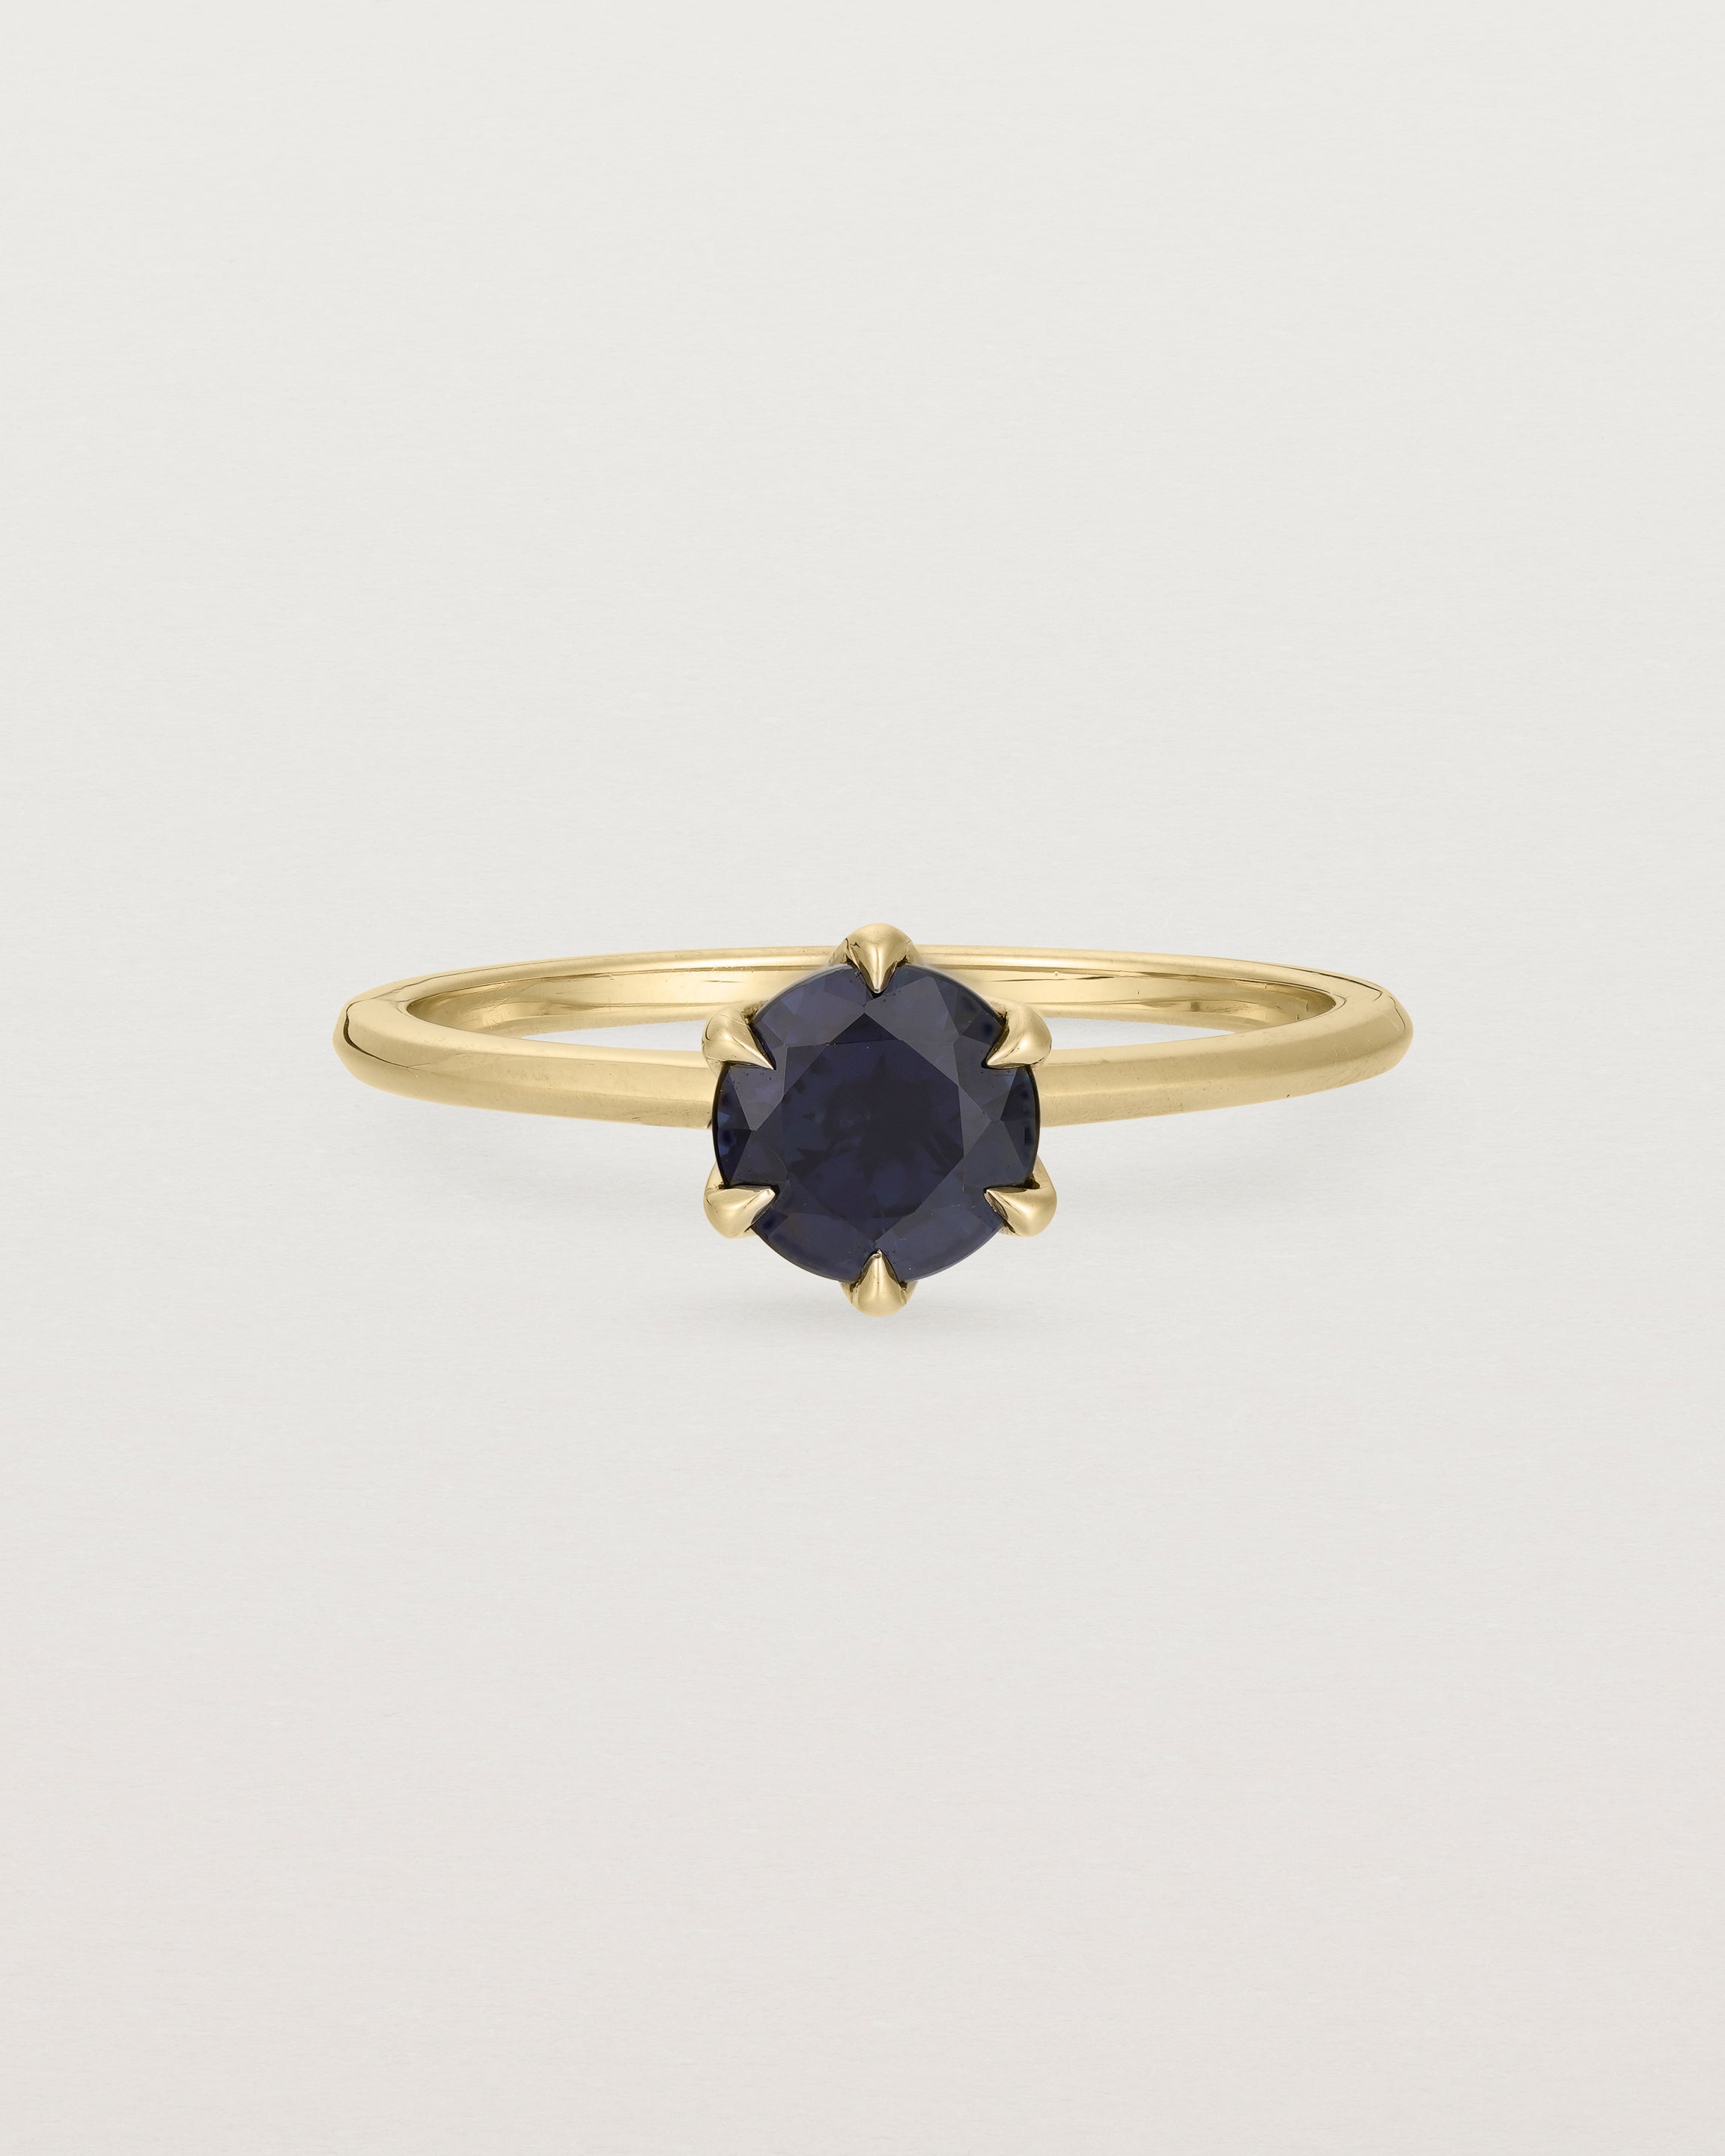 Front view of the Mandala Solitaire Ring | Australian Sapphire & Diamonds | Yellow Gold.